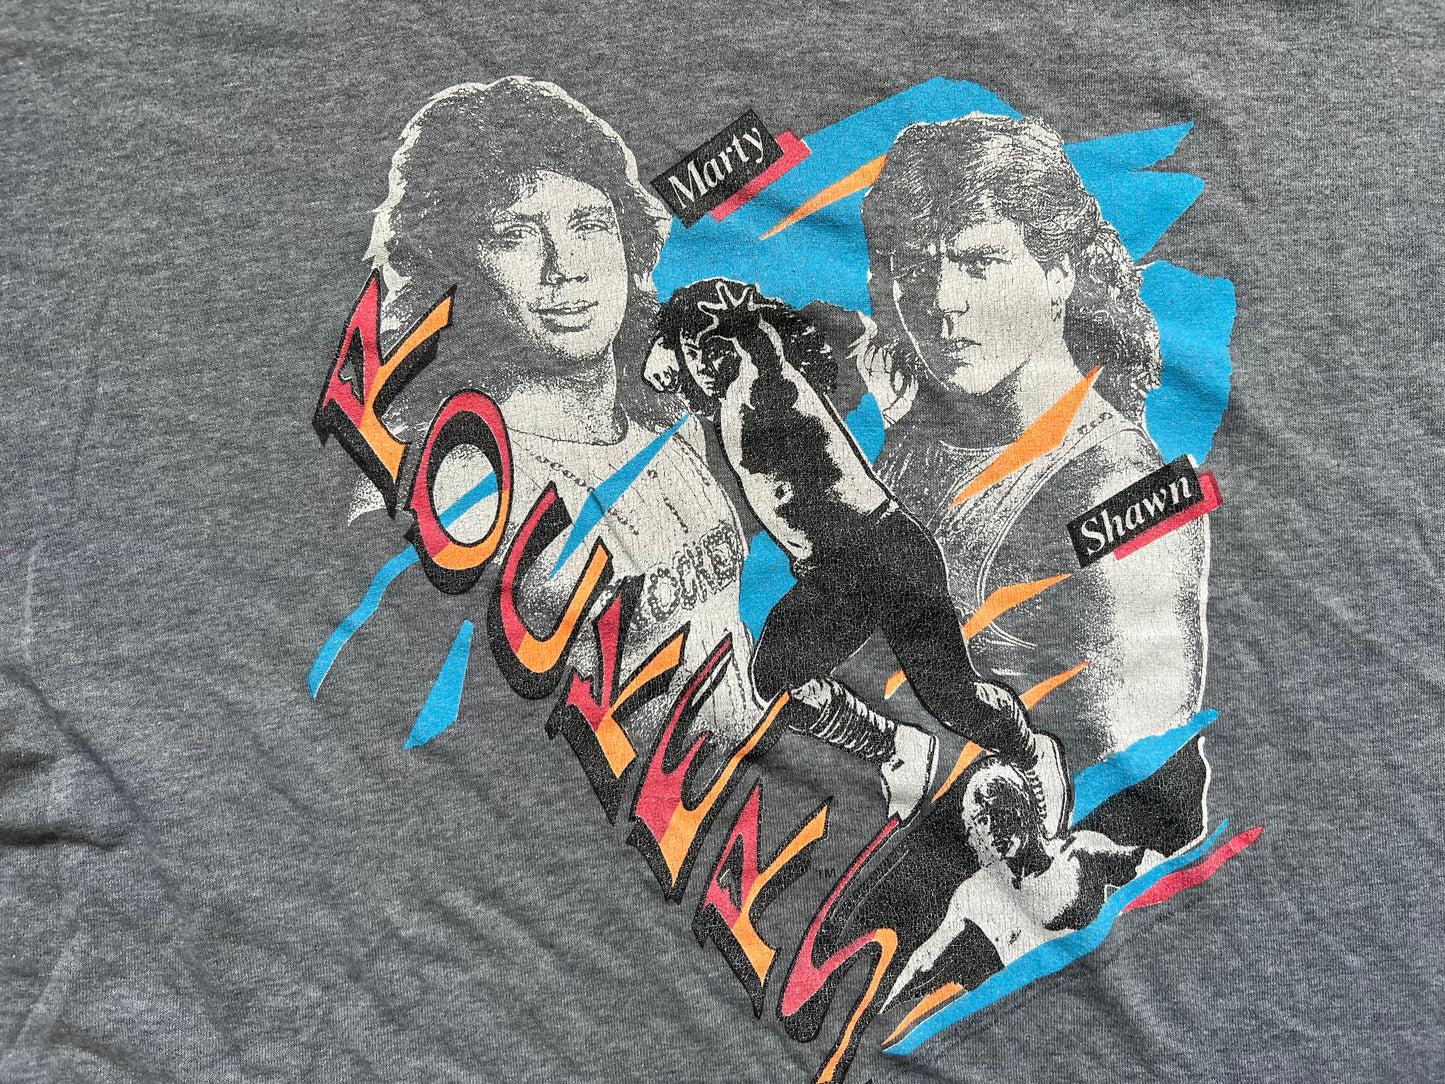 1990 WWF Rockers shirt featuring Shawn Michaels and Marty Jannetty